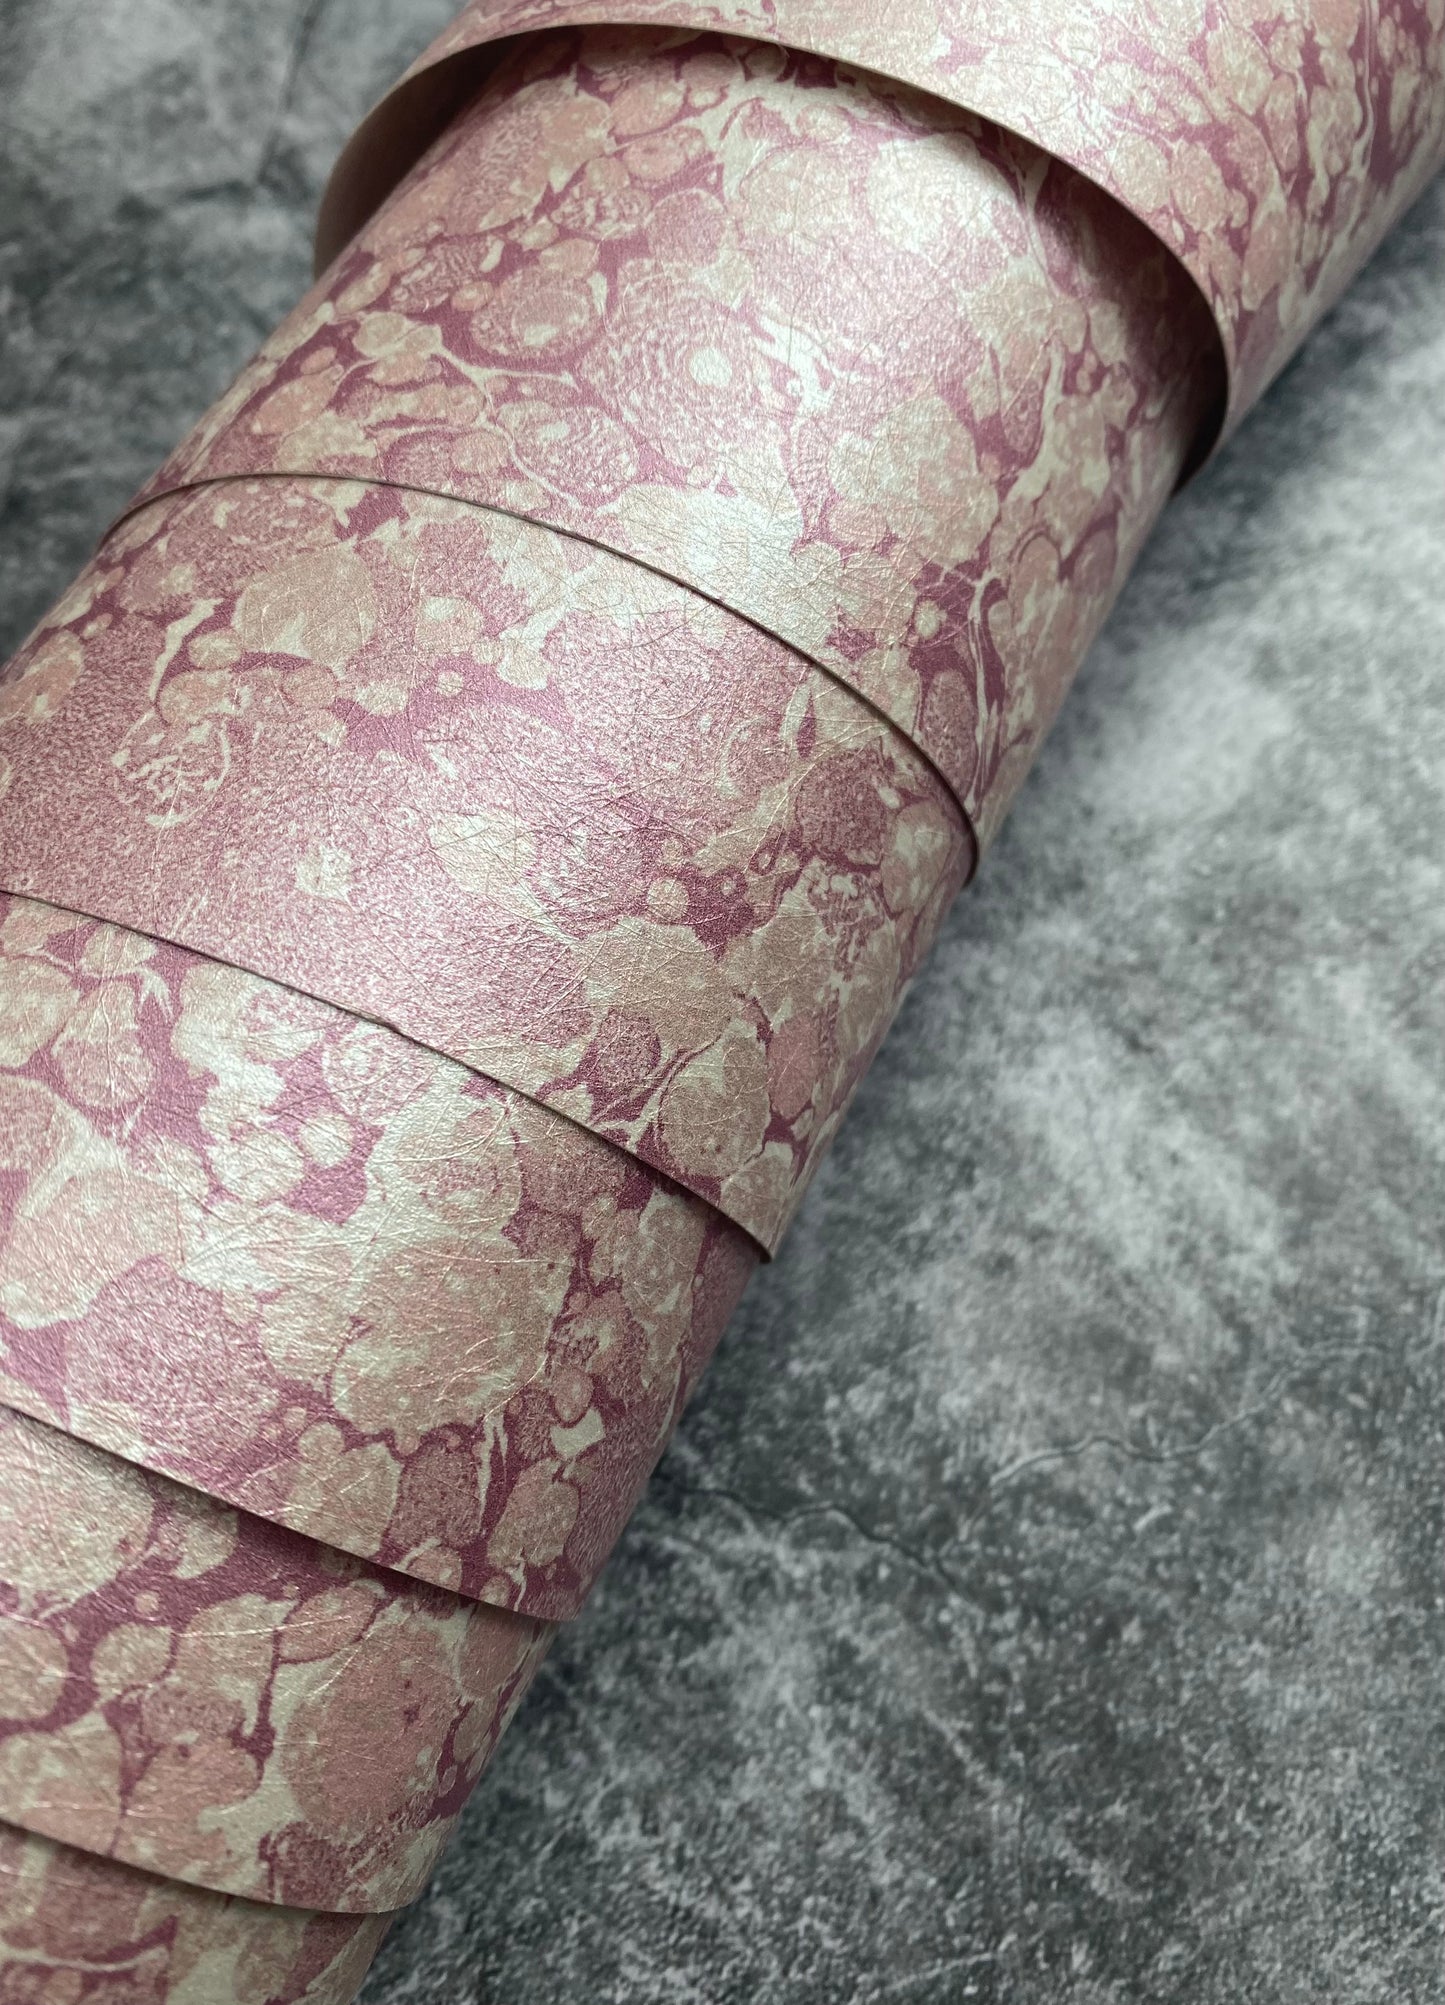 Marbled Wallpaper - 'Ditzy' Col: Eglantine- Mica Coated Non-Woven